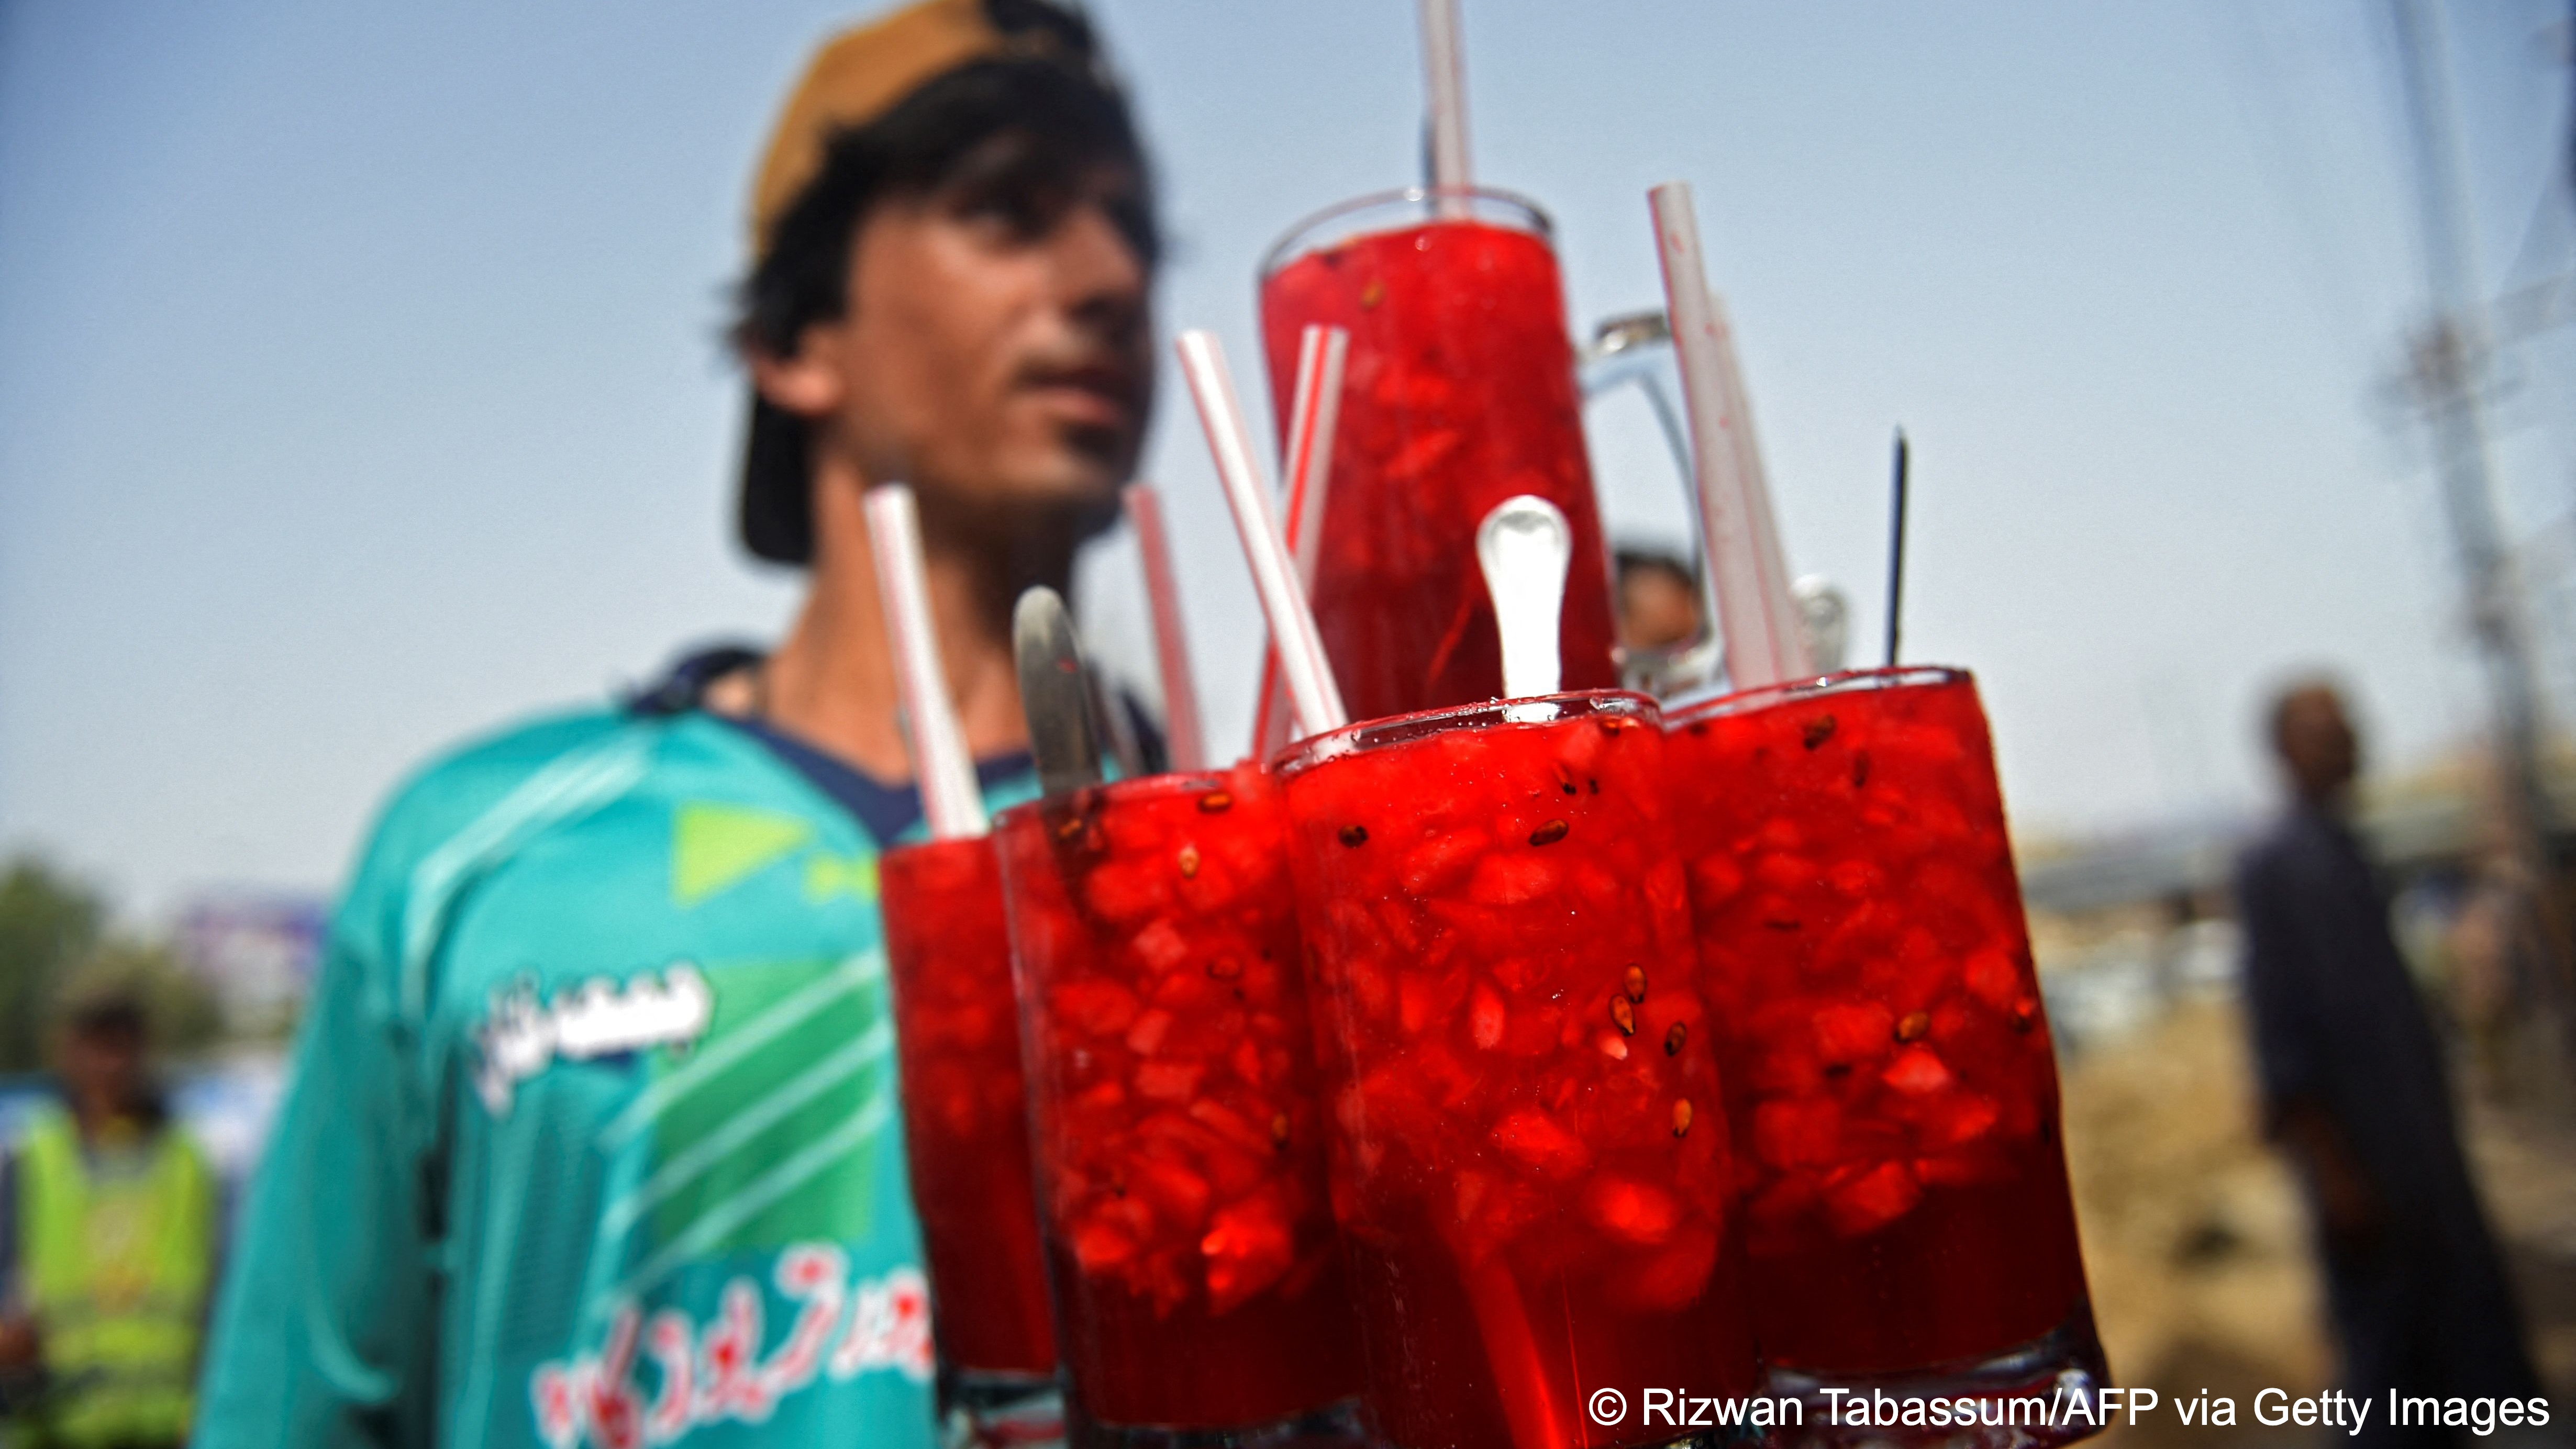 Vendor with a tray of glasses filled with Rooh Afza in Karachi, Pakistan (photo: AFP/Getty Images)